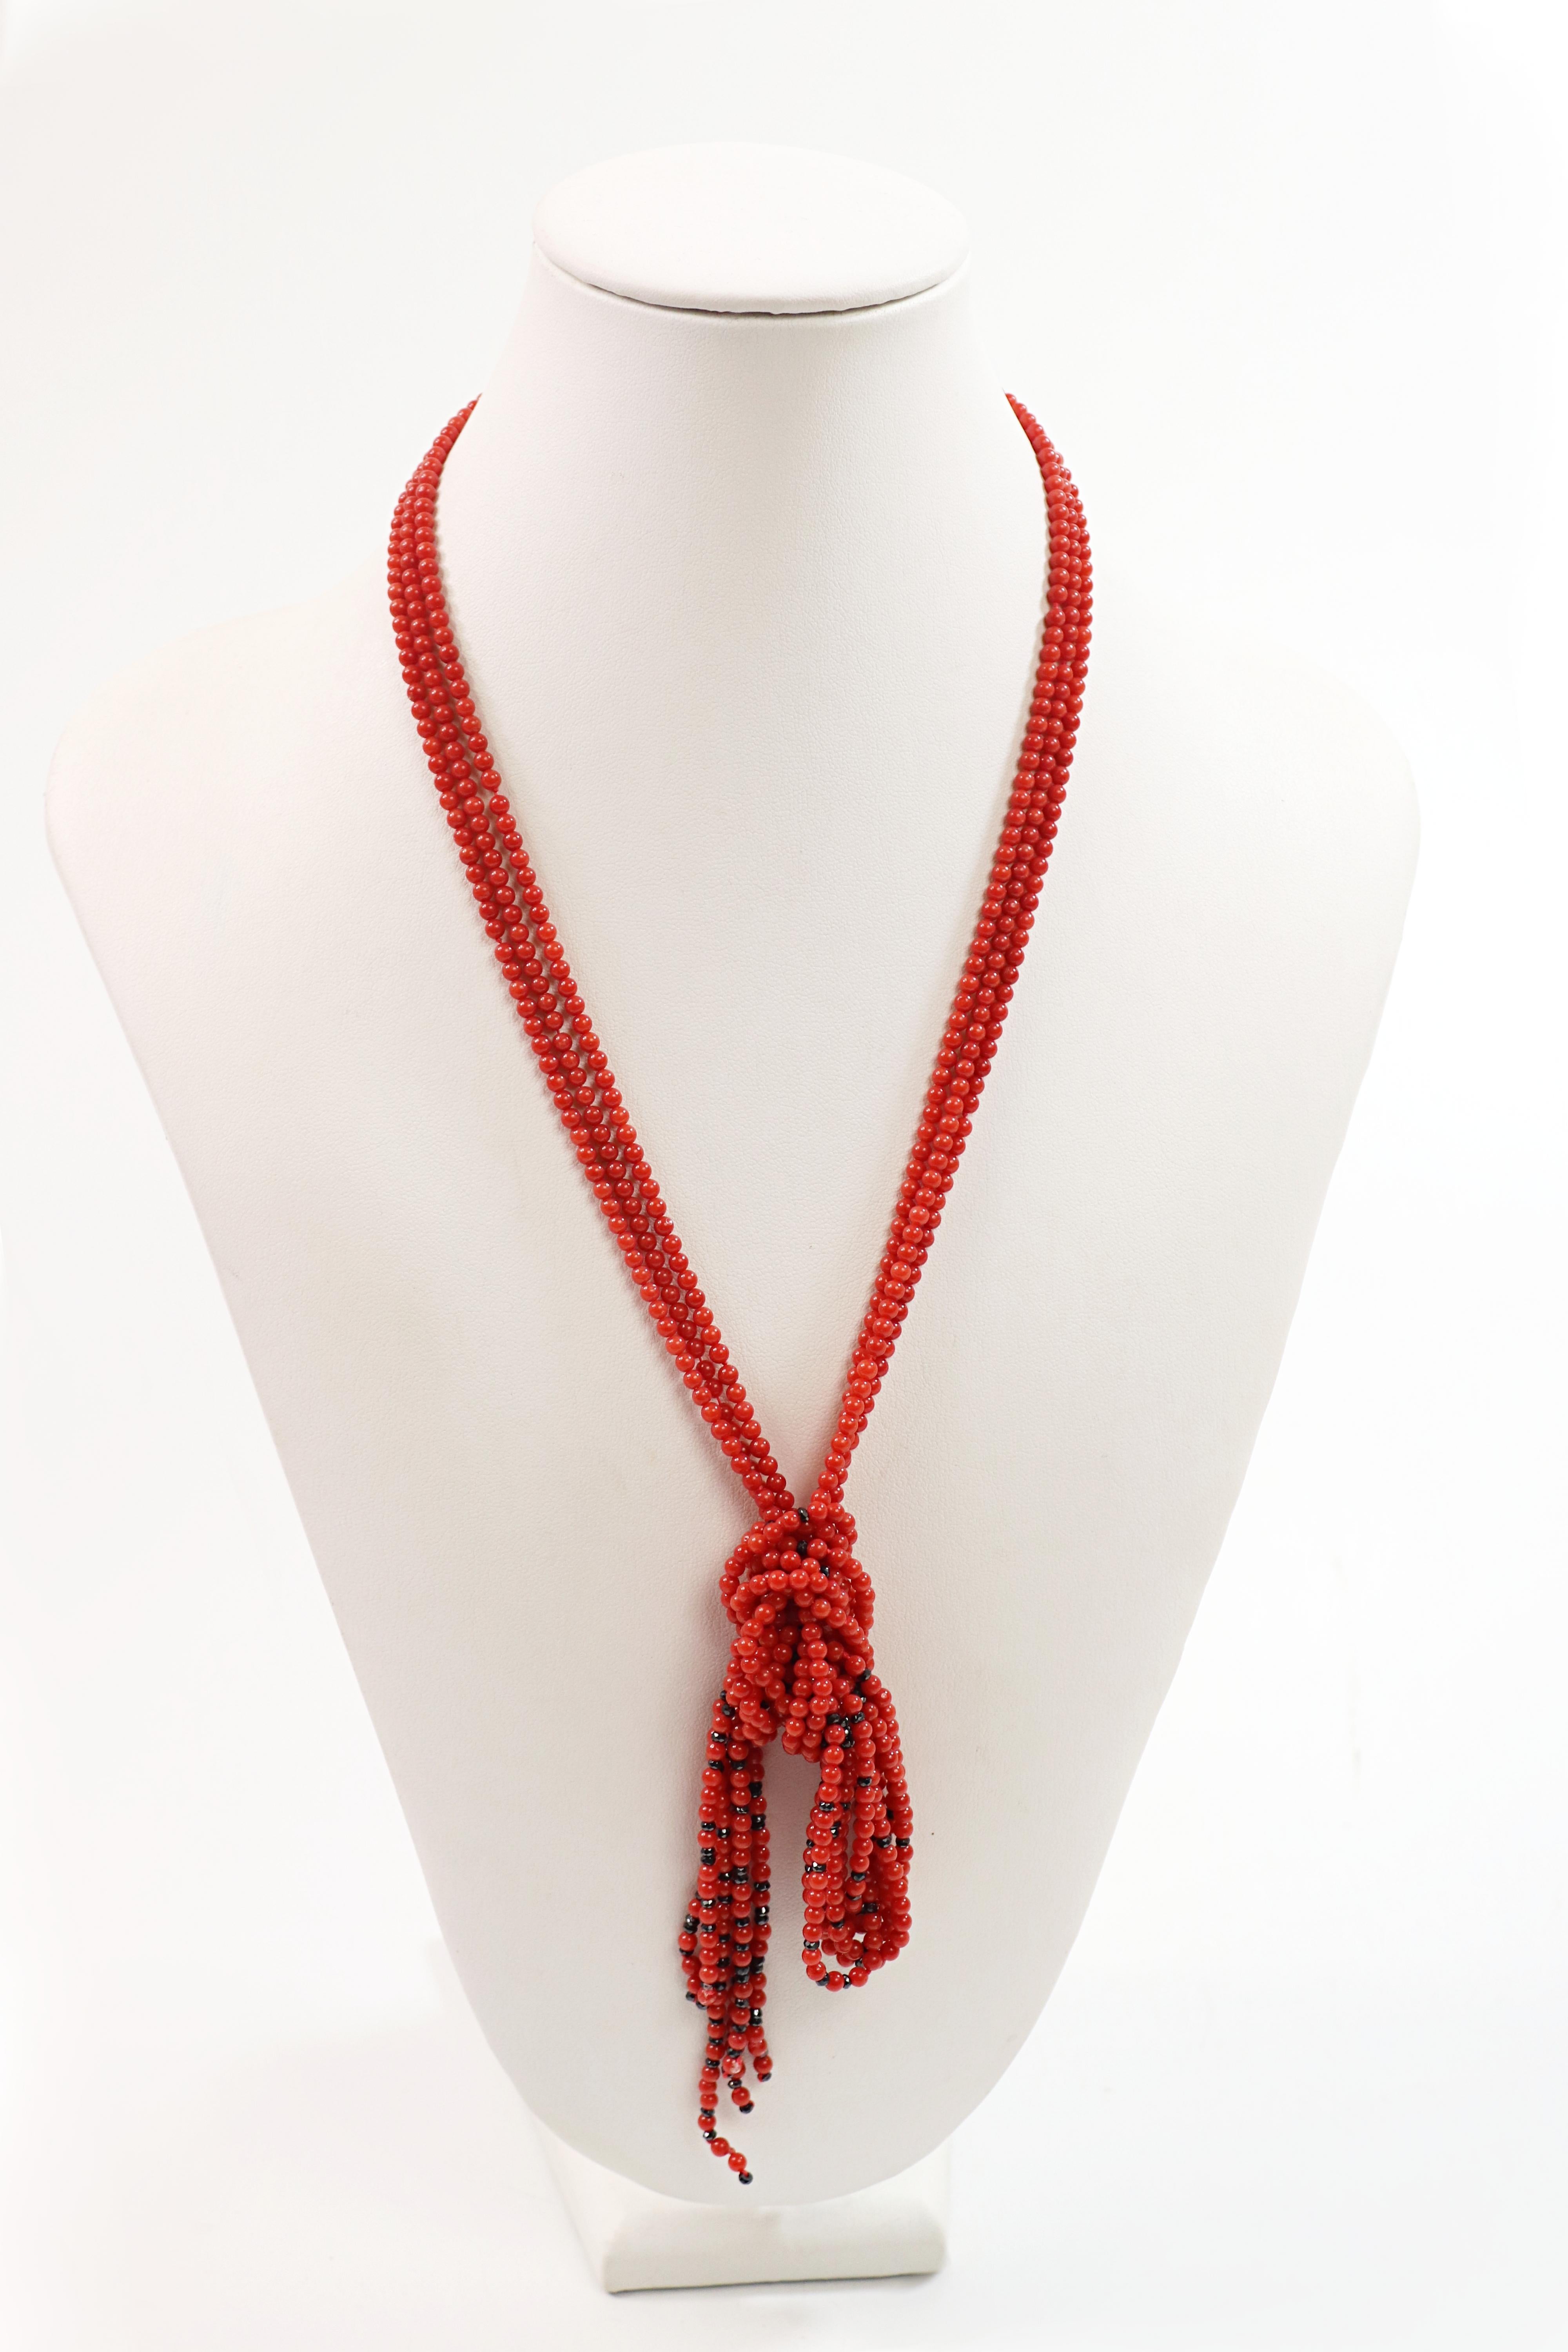 Composed of numerous 3.00 mm, red coral beads, accented by several,
2.3 mm, black onyx faceted beads, completed by an 18k yellow gold 10 X
1.3 X 2.9 mm, connecting stay, forming a three-strand 24 inch sautoir
necklace, Total Weight 57.52 grams.